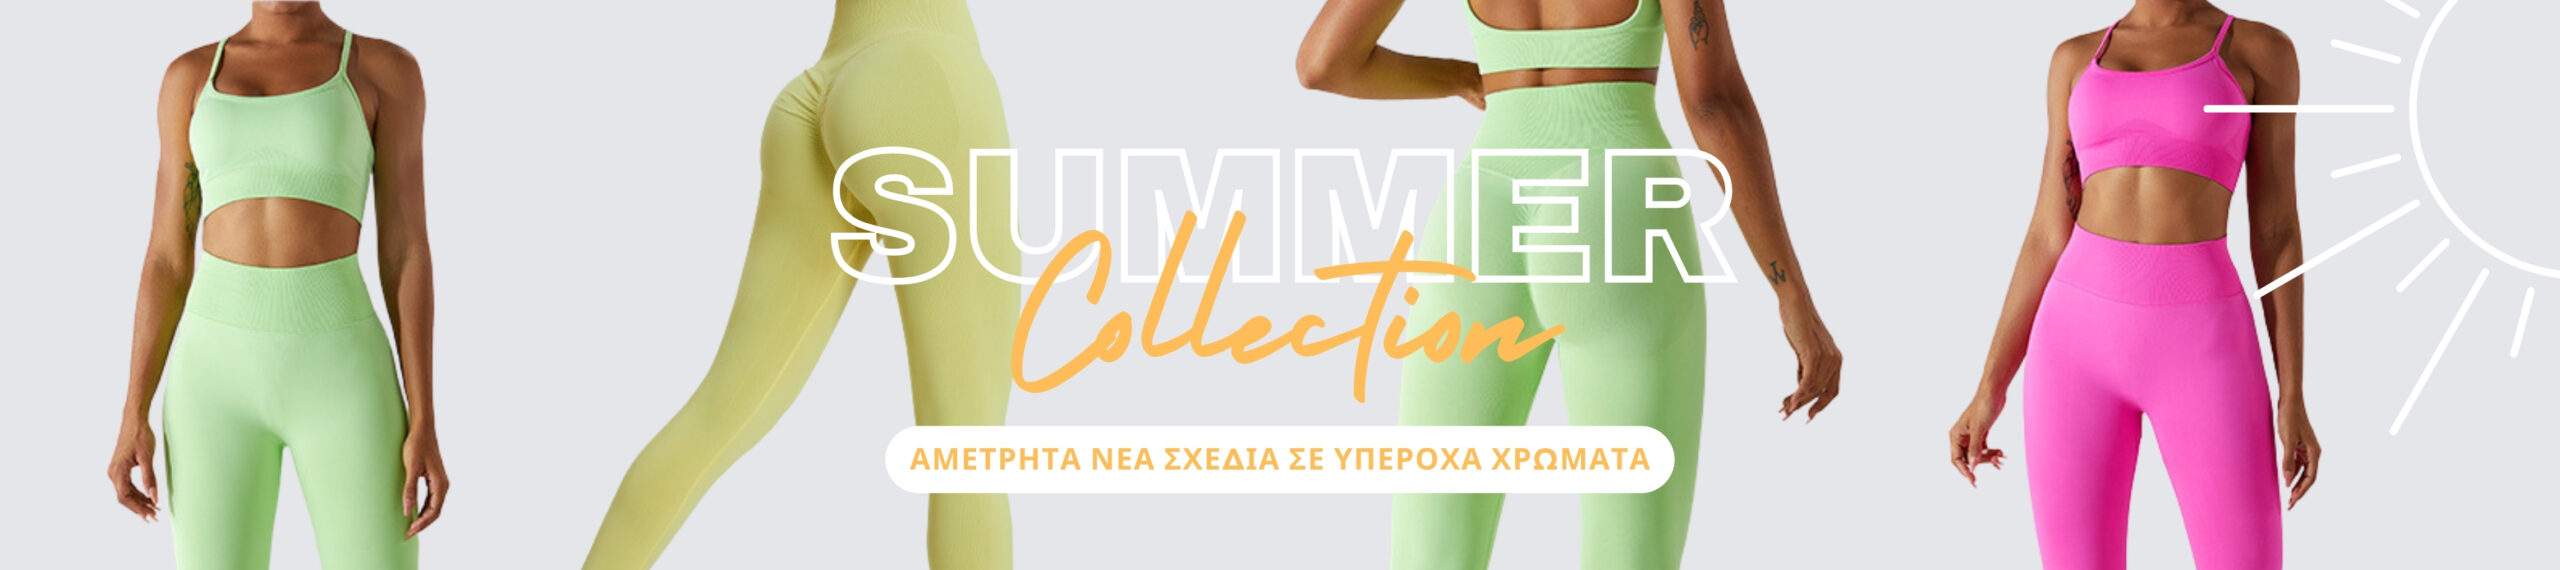 Fitness Collection Banner